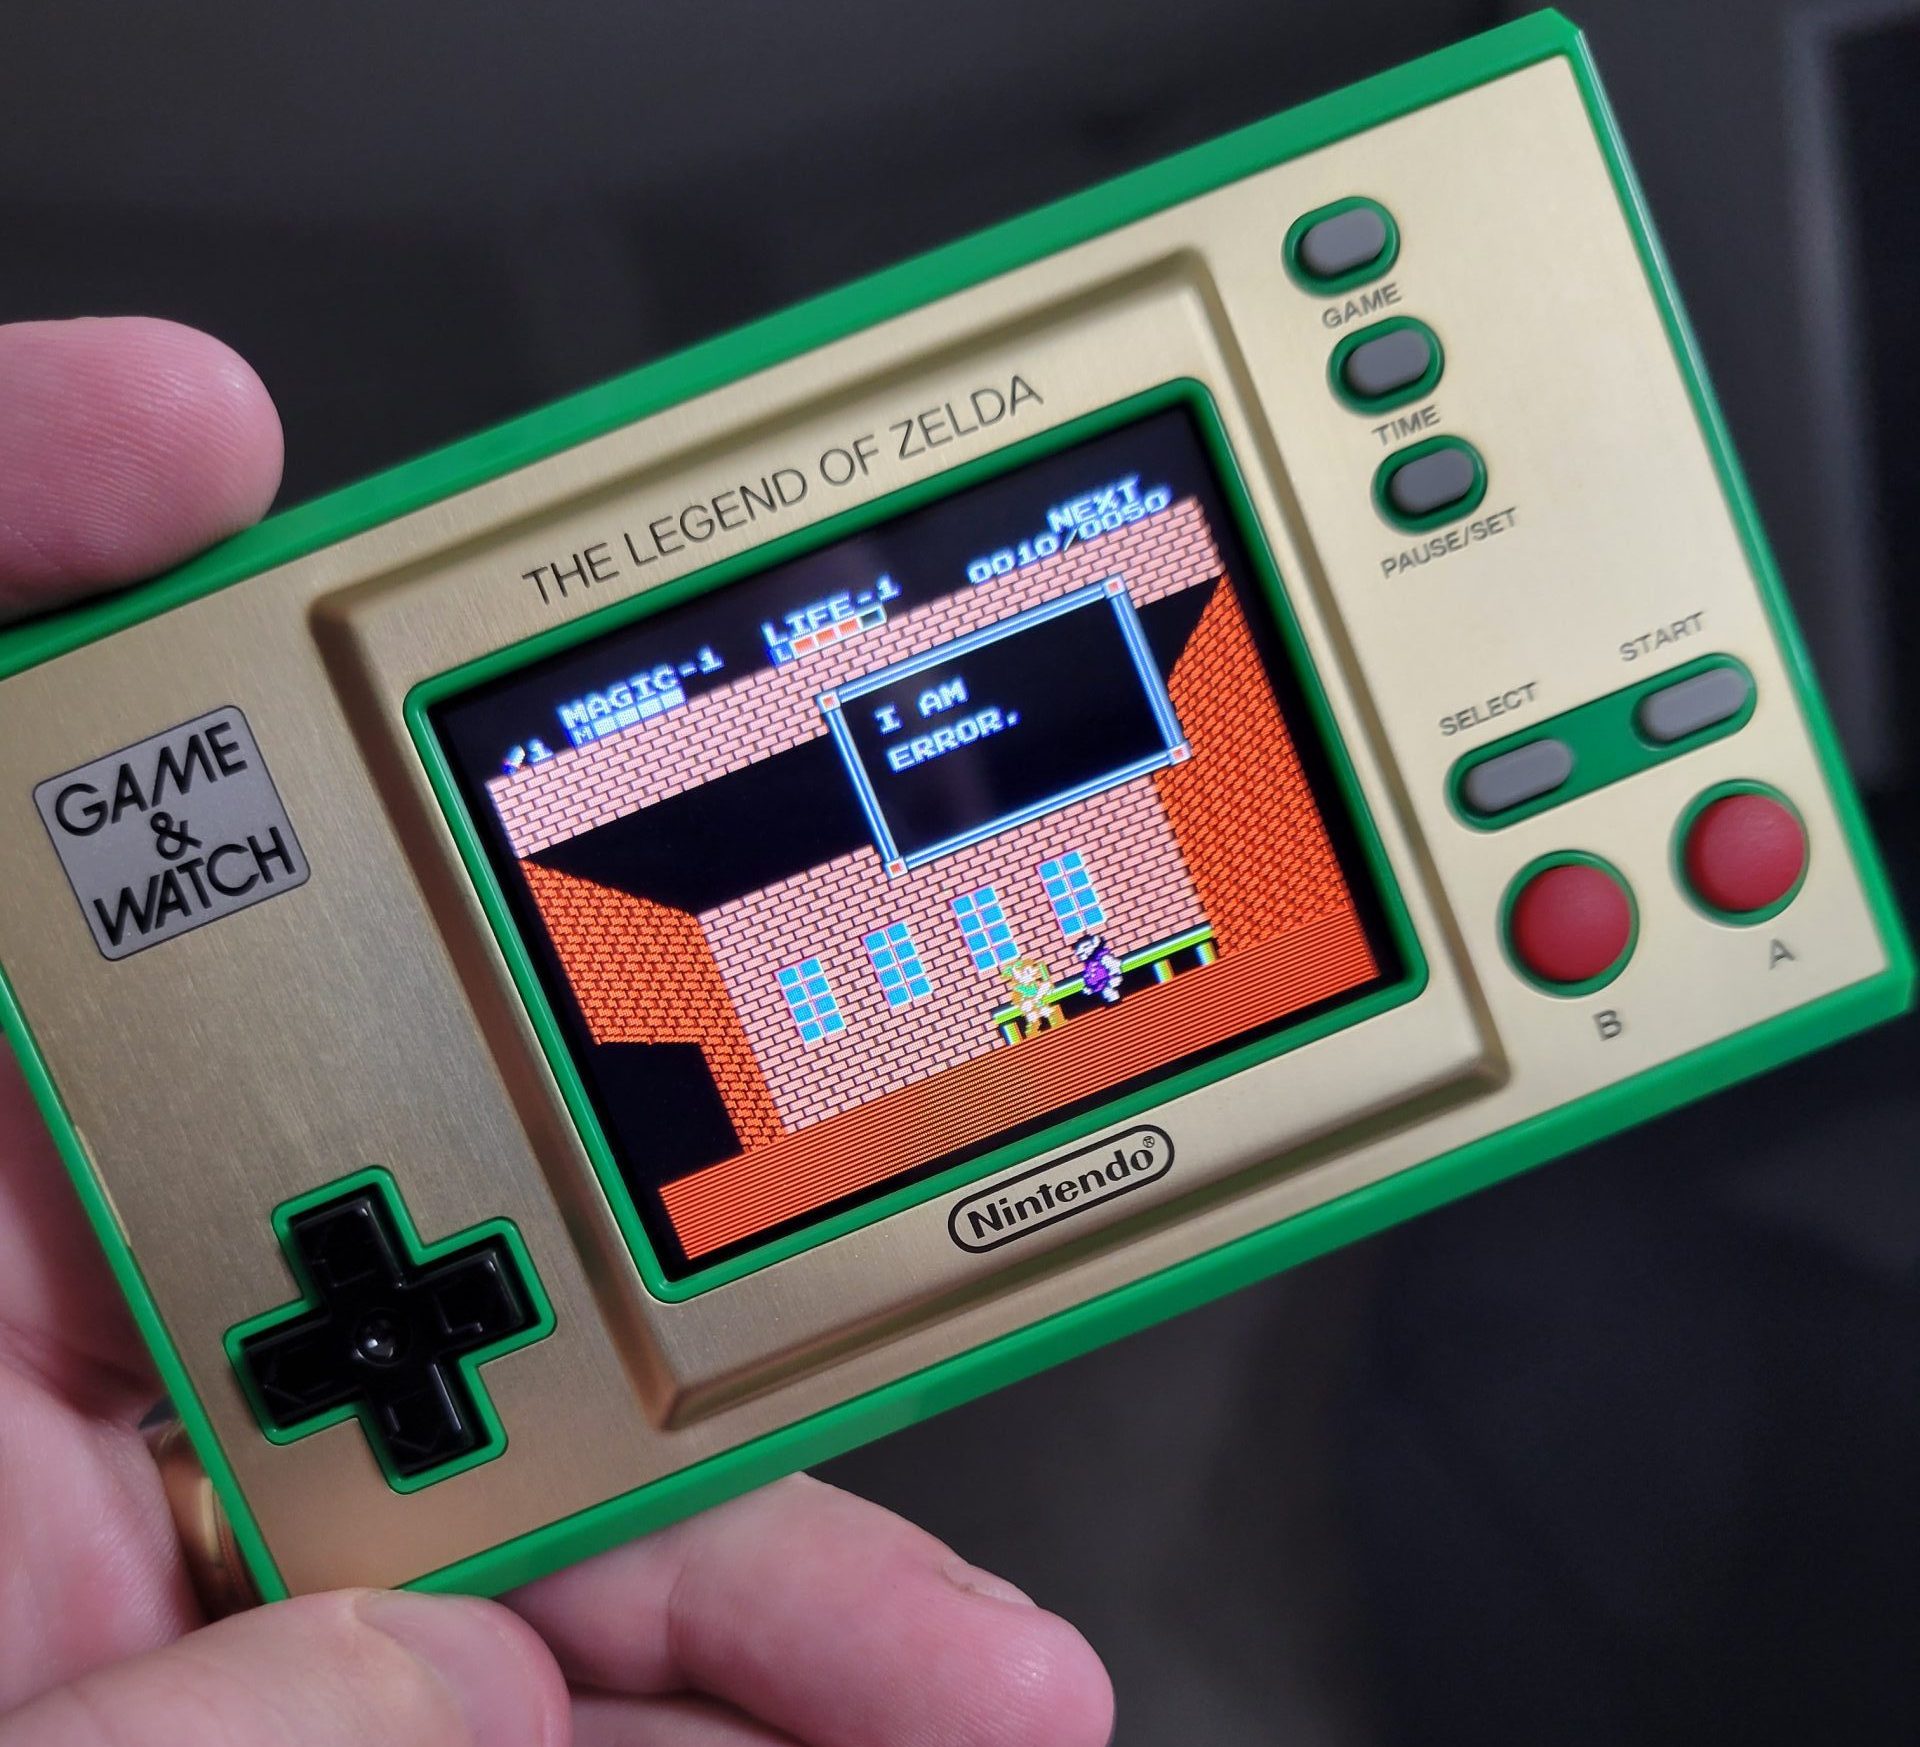 Game & Watch: Legend of Zelda Anniversary Edition review – the hero of time  now tells the time